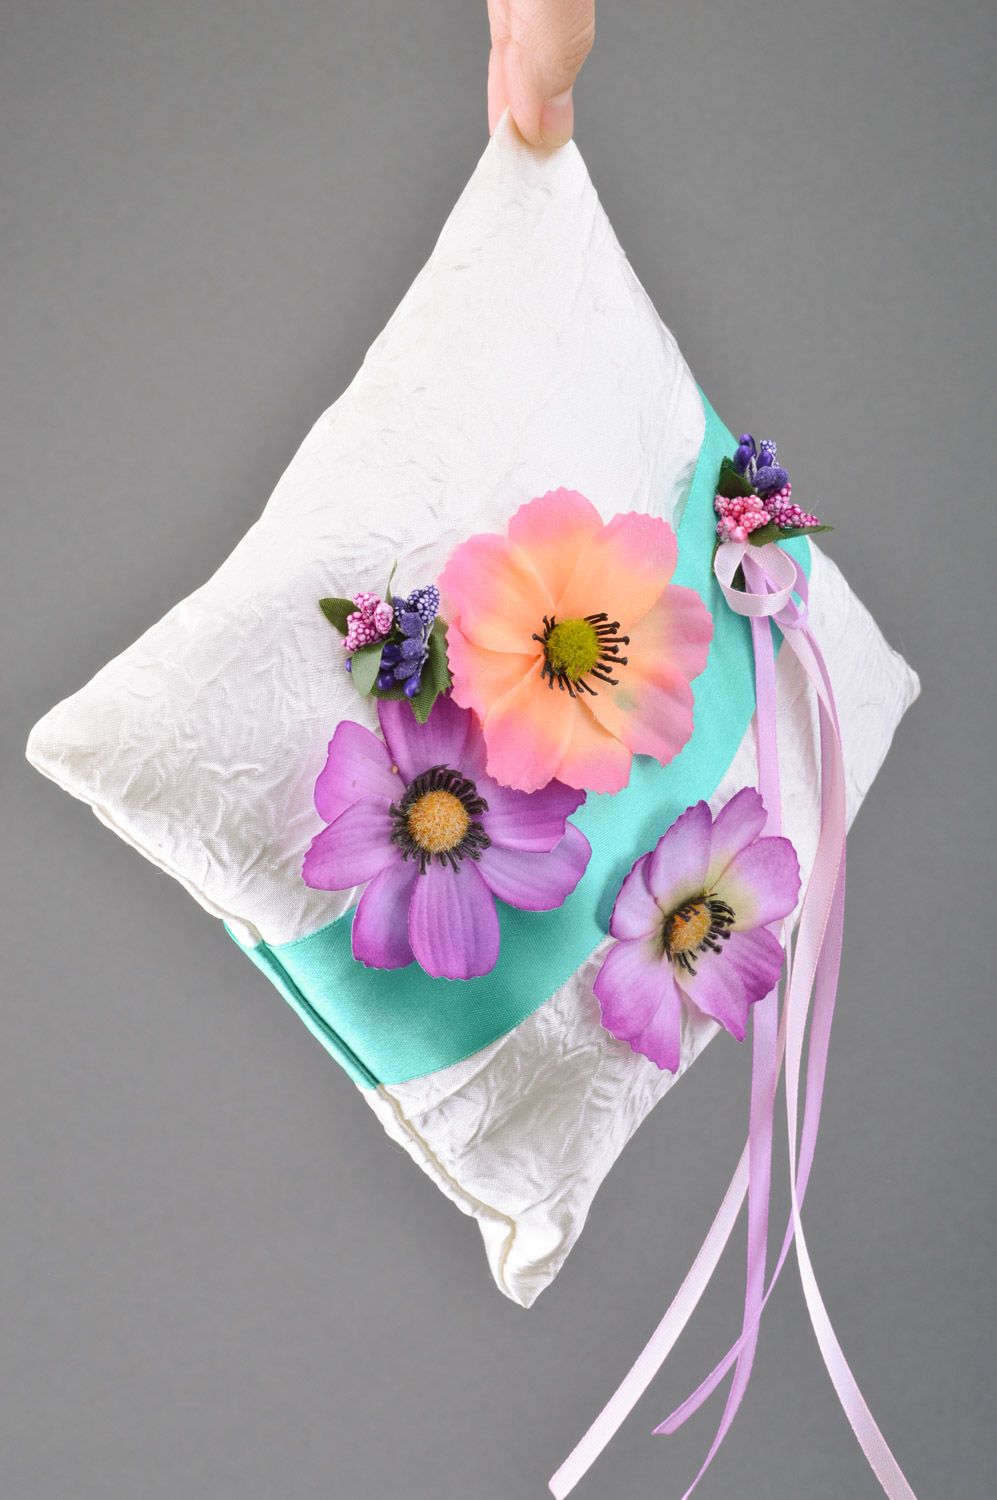 Large beautiful handmade ring pillow sewn of white satin fabric with flowers photo 3